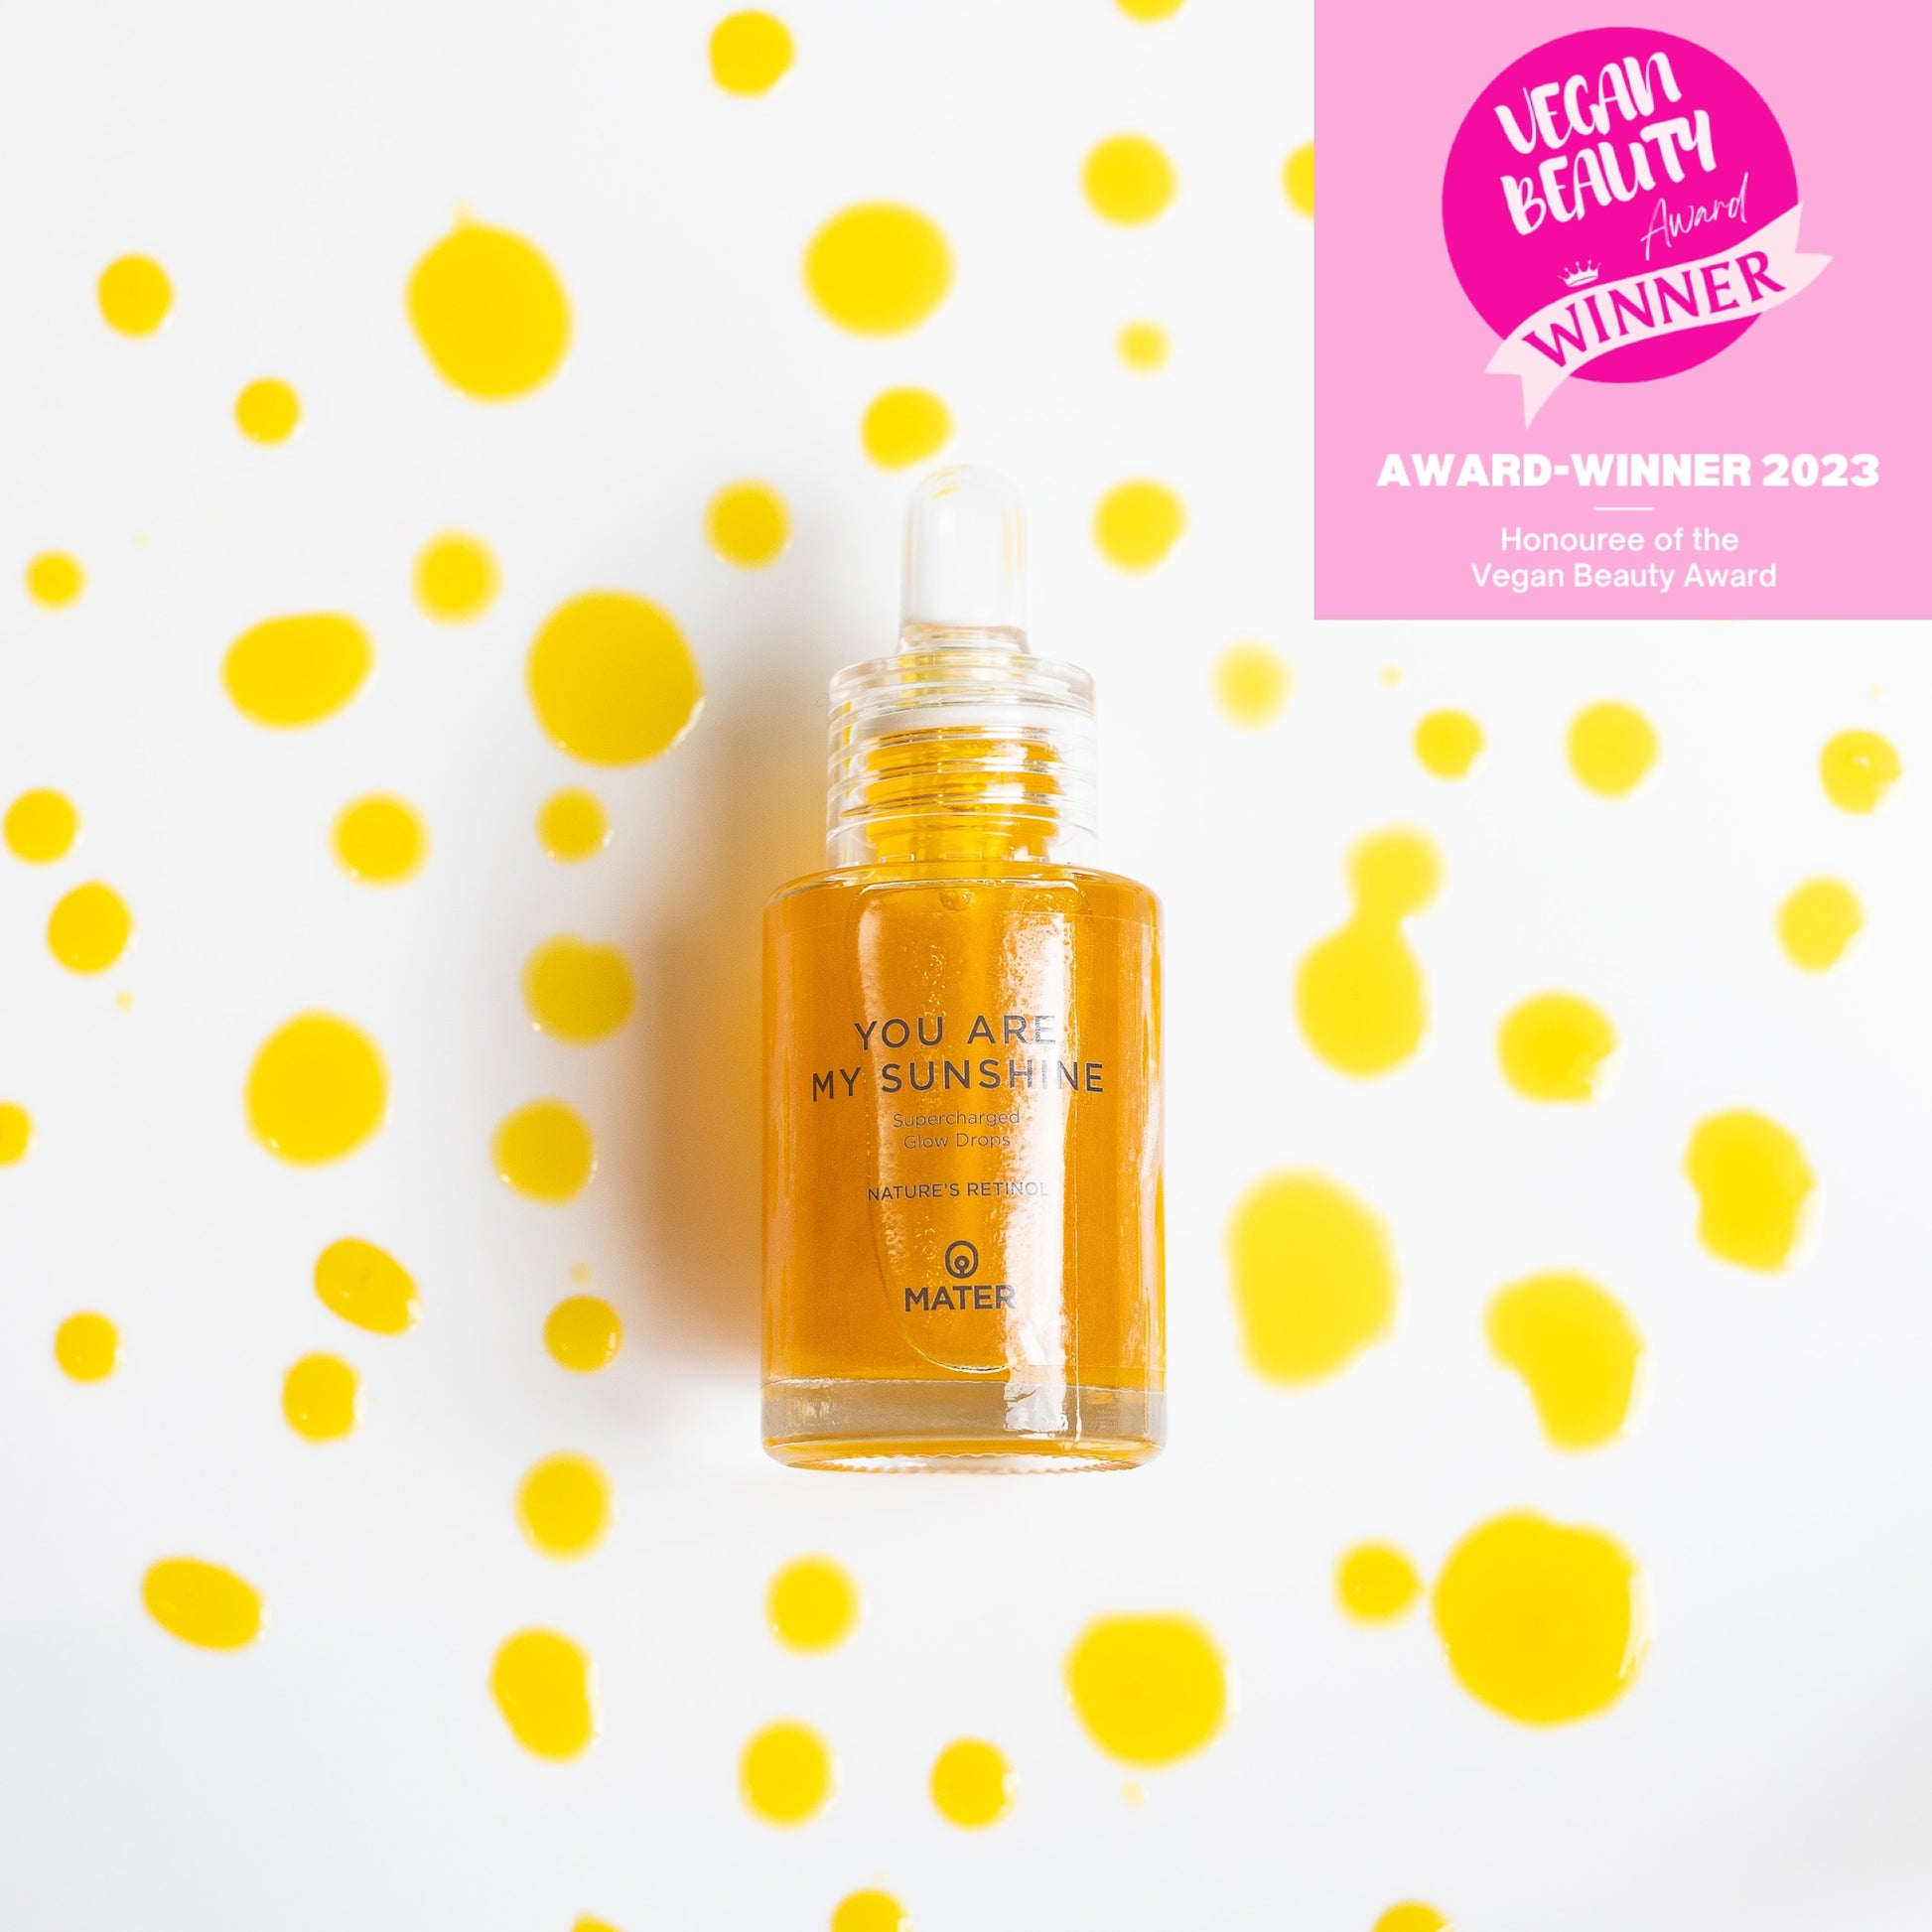 YOU ARE MY SUNSHINE Supercharged Glow Drops product shot with Vegan Beauty award seal and product drops on white background